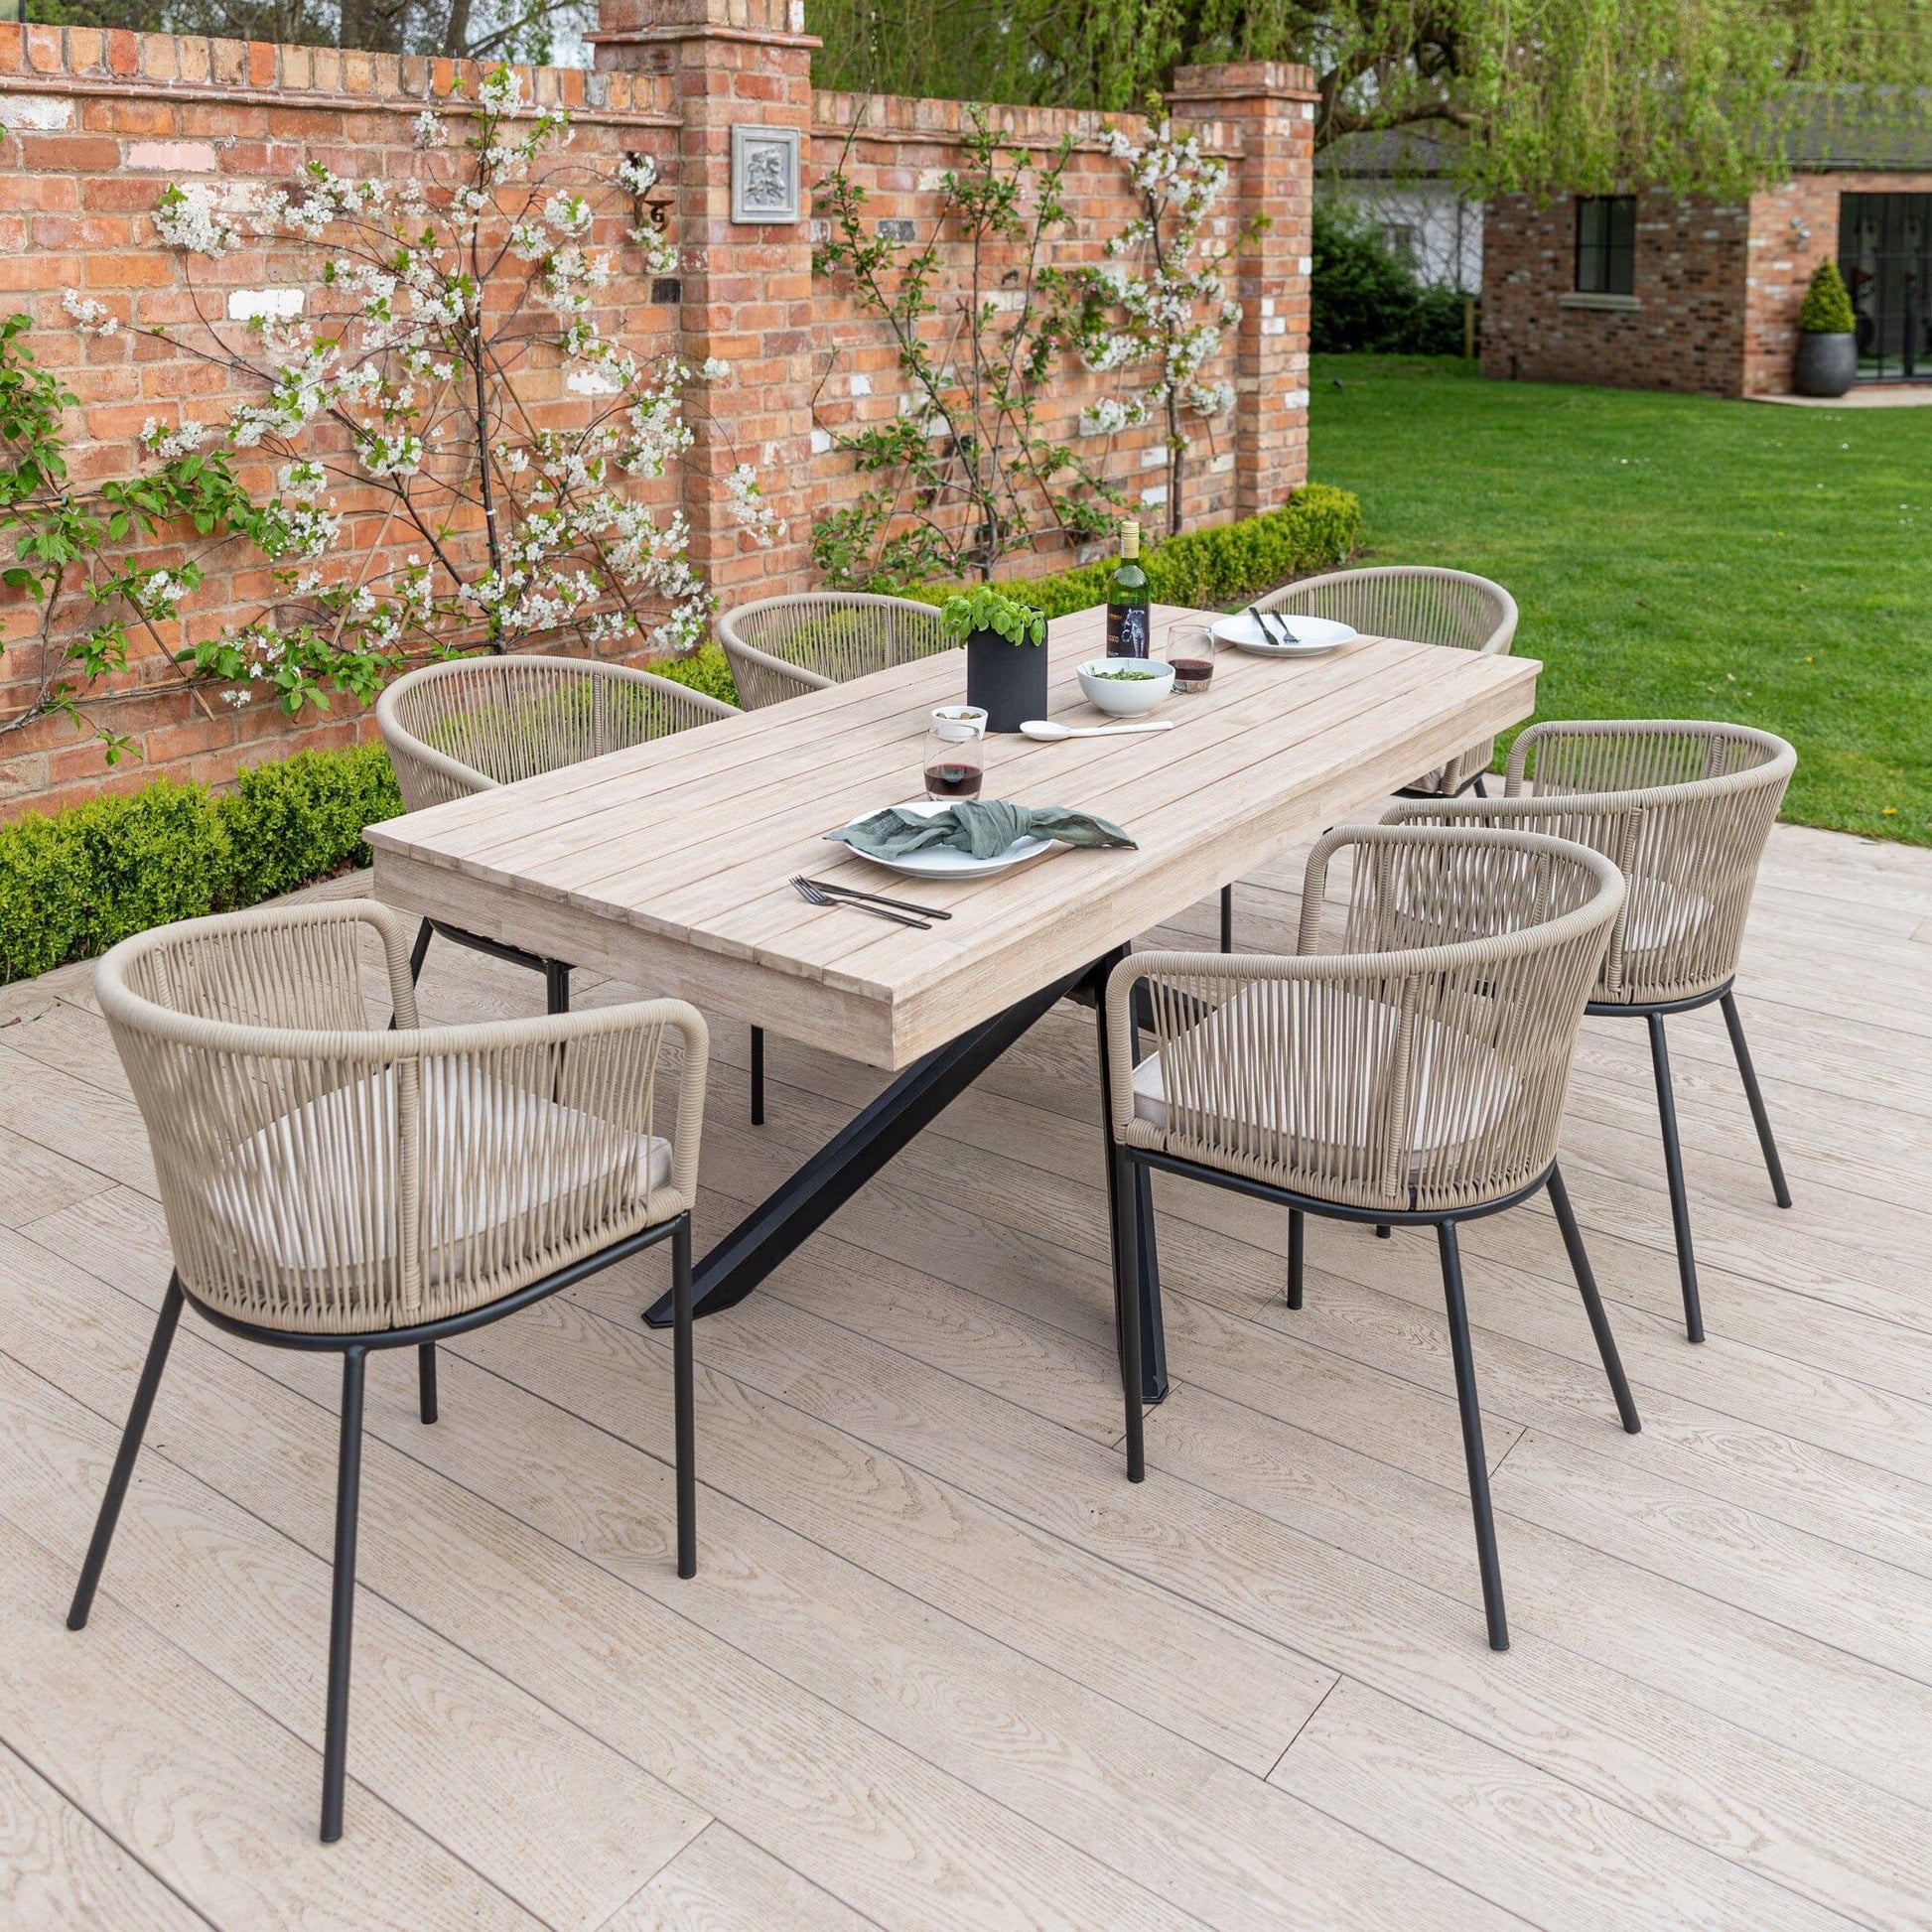 Amelia Dining Table 6 Hali Chairs Natural Garden Dining 